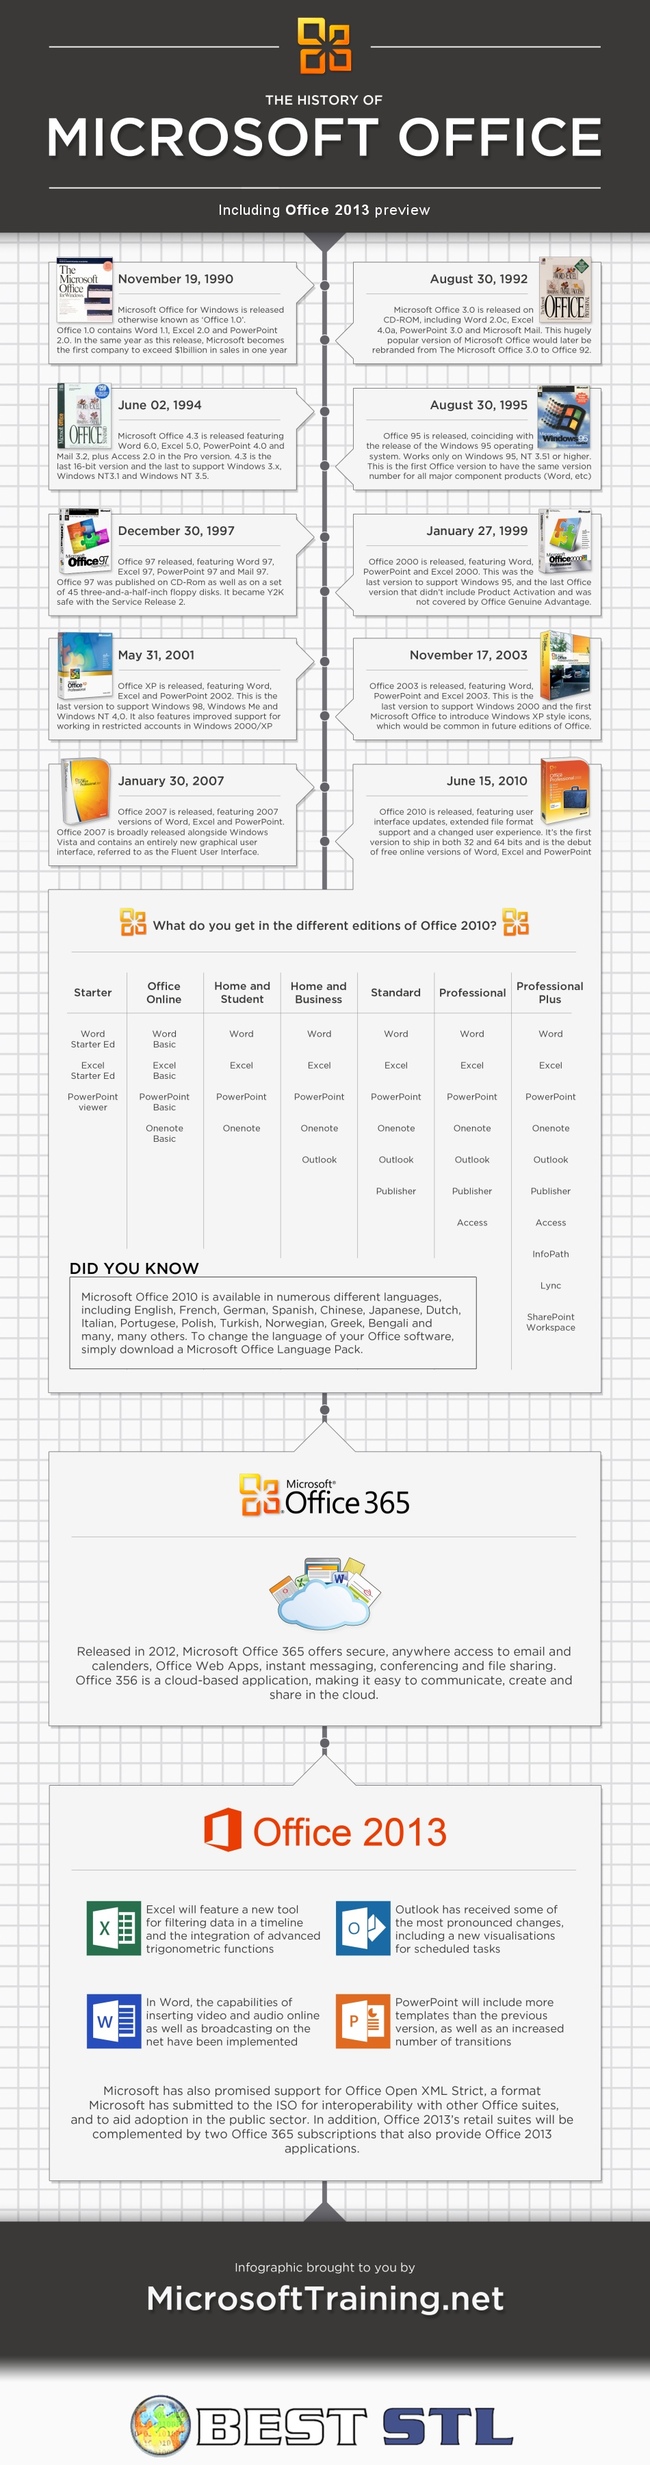 Microsoft Office History Infographic